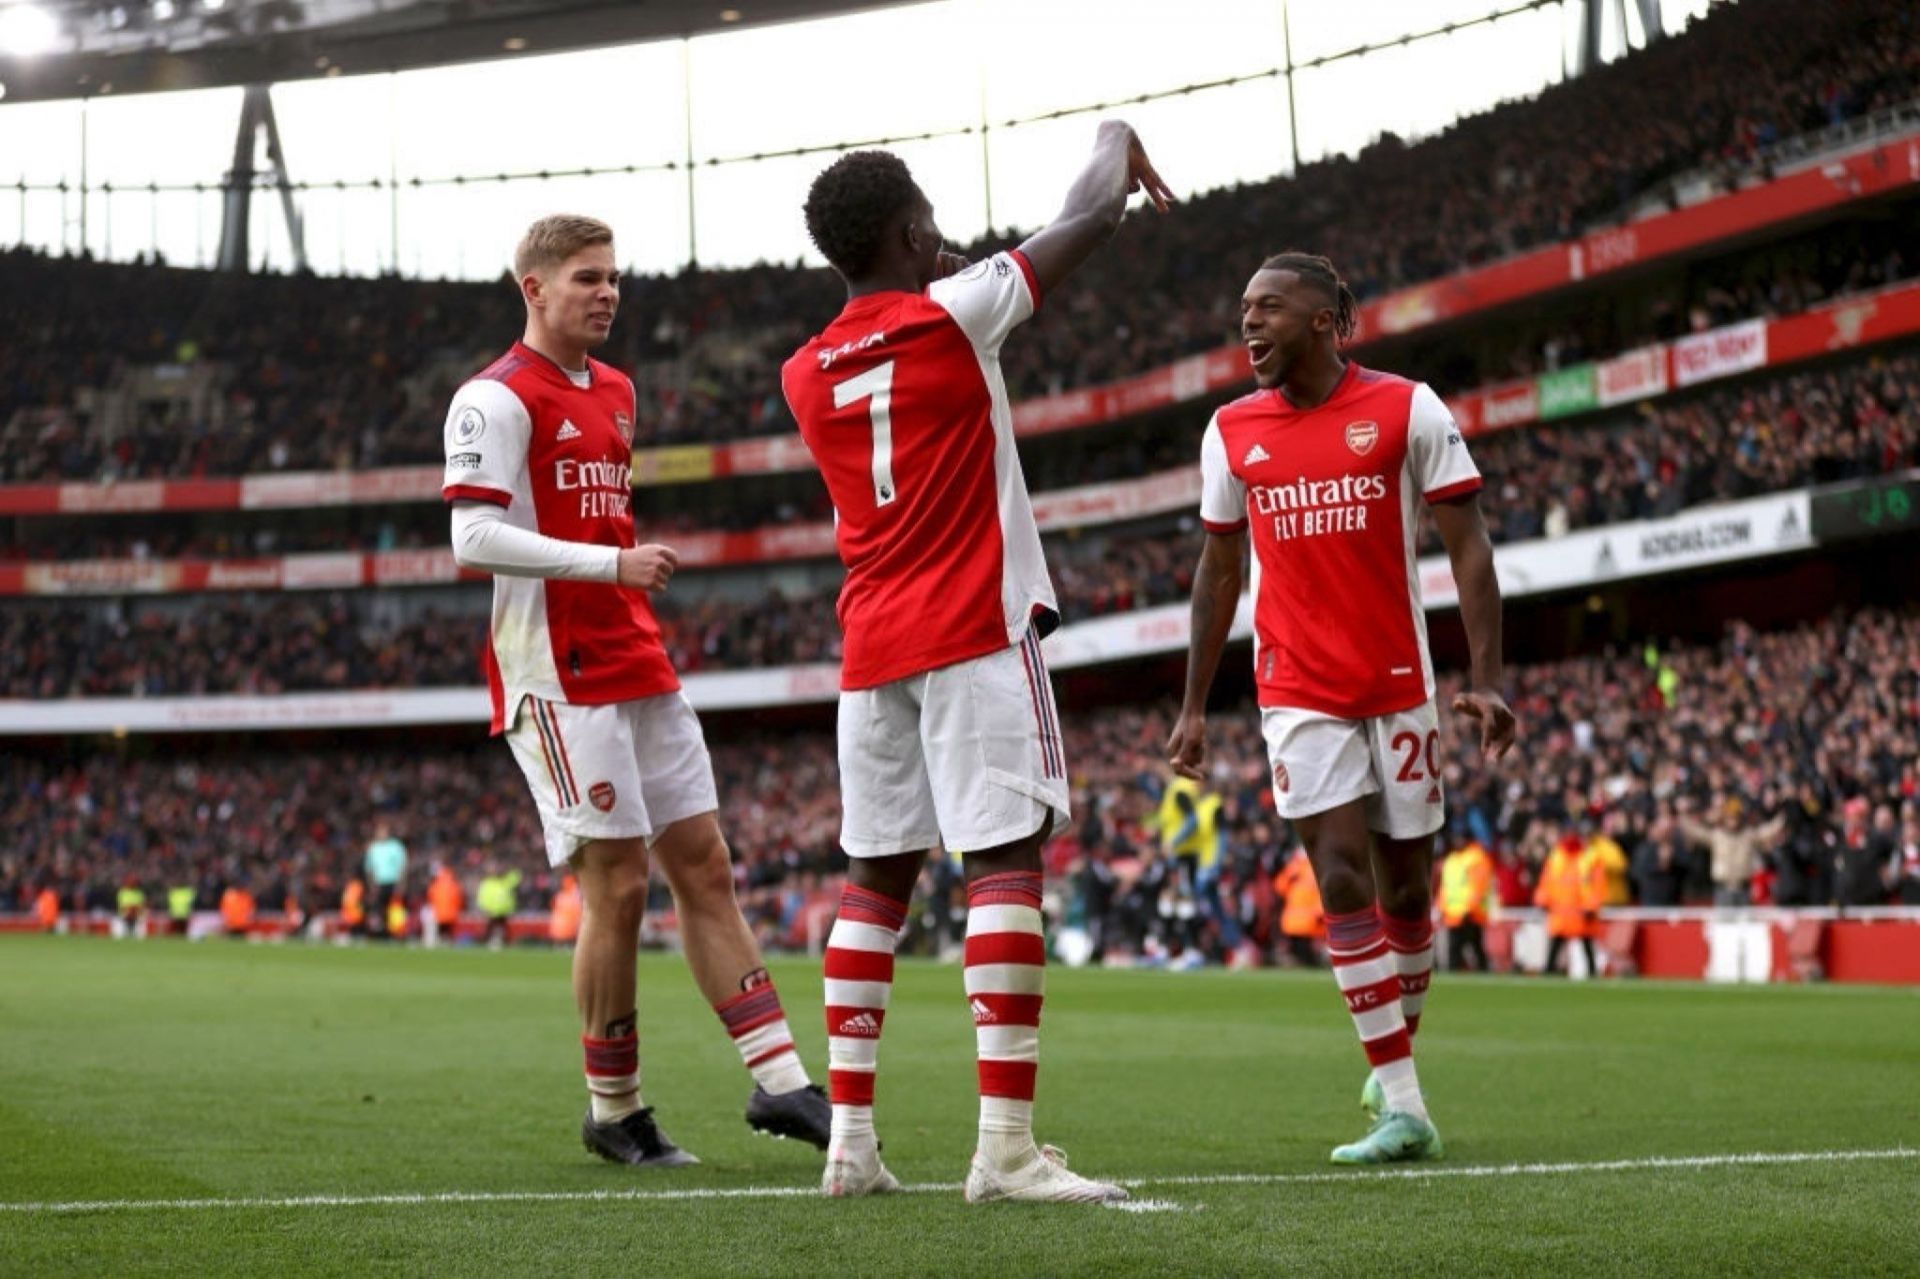 Arsenal defeated Newcastle after a spirited performance